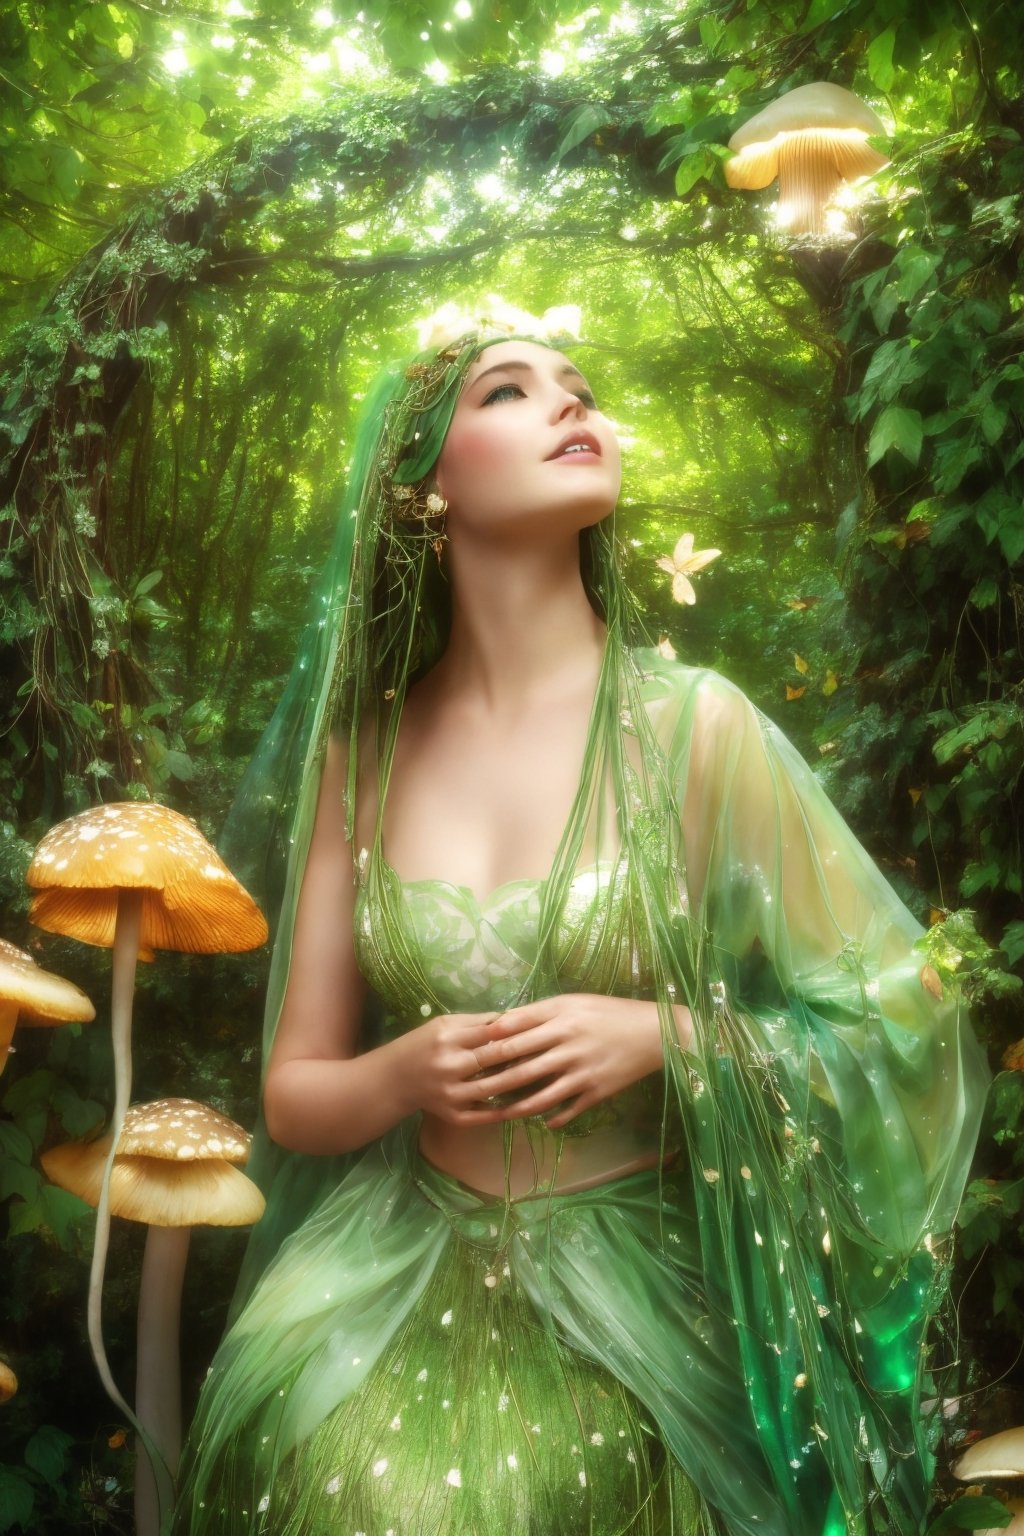 Beneath a canopy of luminous mushrooms, a young elf with emerald eyes braided her hair with vines, humming an ancient melody. Butterflies with shimmering wings danced around her, drawn to the magic in her touch.photorealistic,ViNtAgE,photorealistic